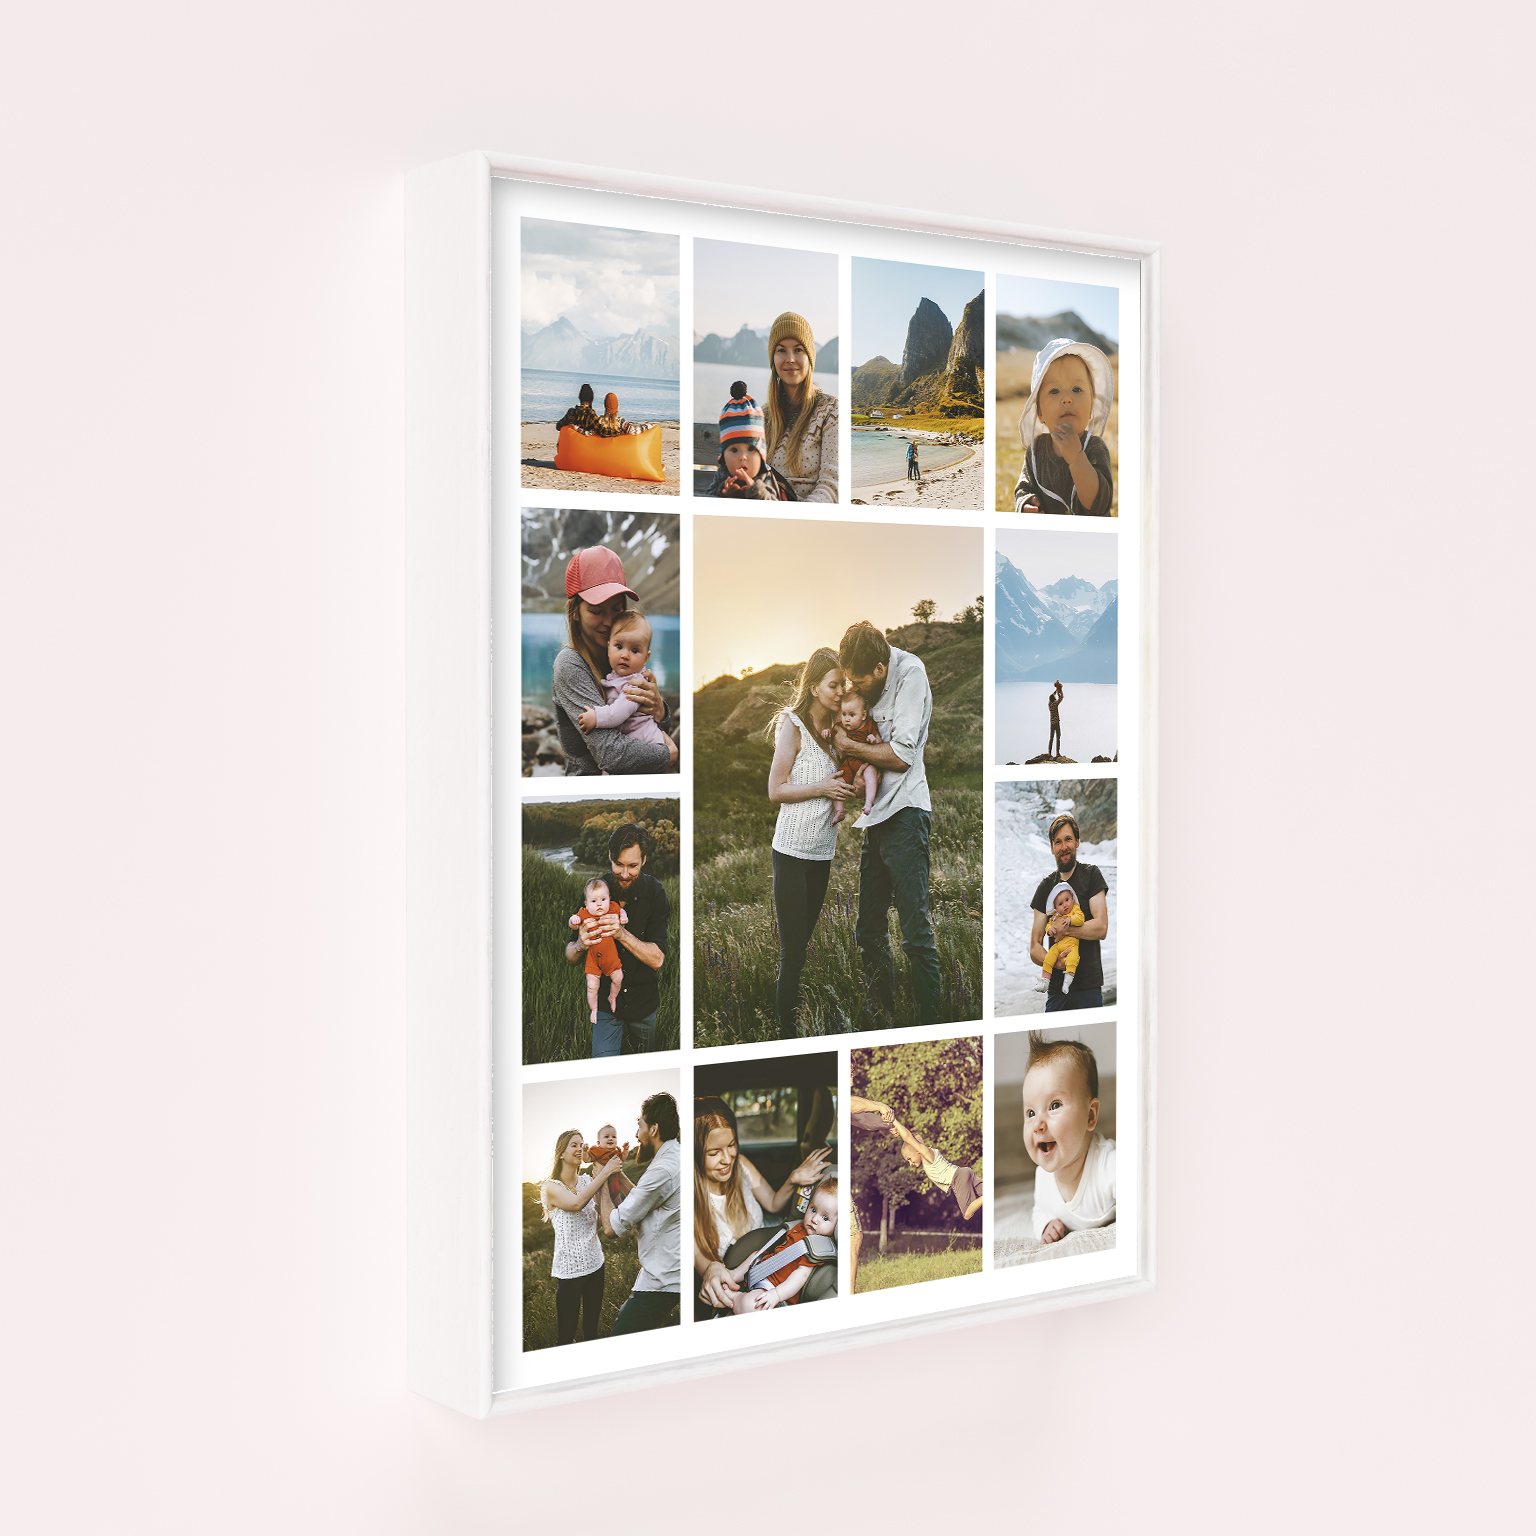 Melody of Memories Wall Art Framed Prints - Compose a personalized canvas harmoniously blending countless cherished moments, offering ample space for 10+ photos.